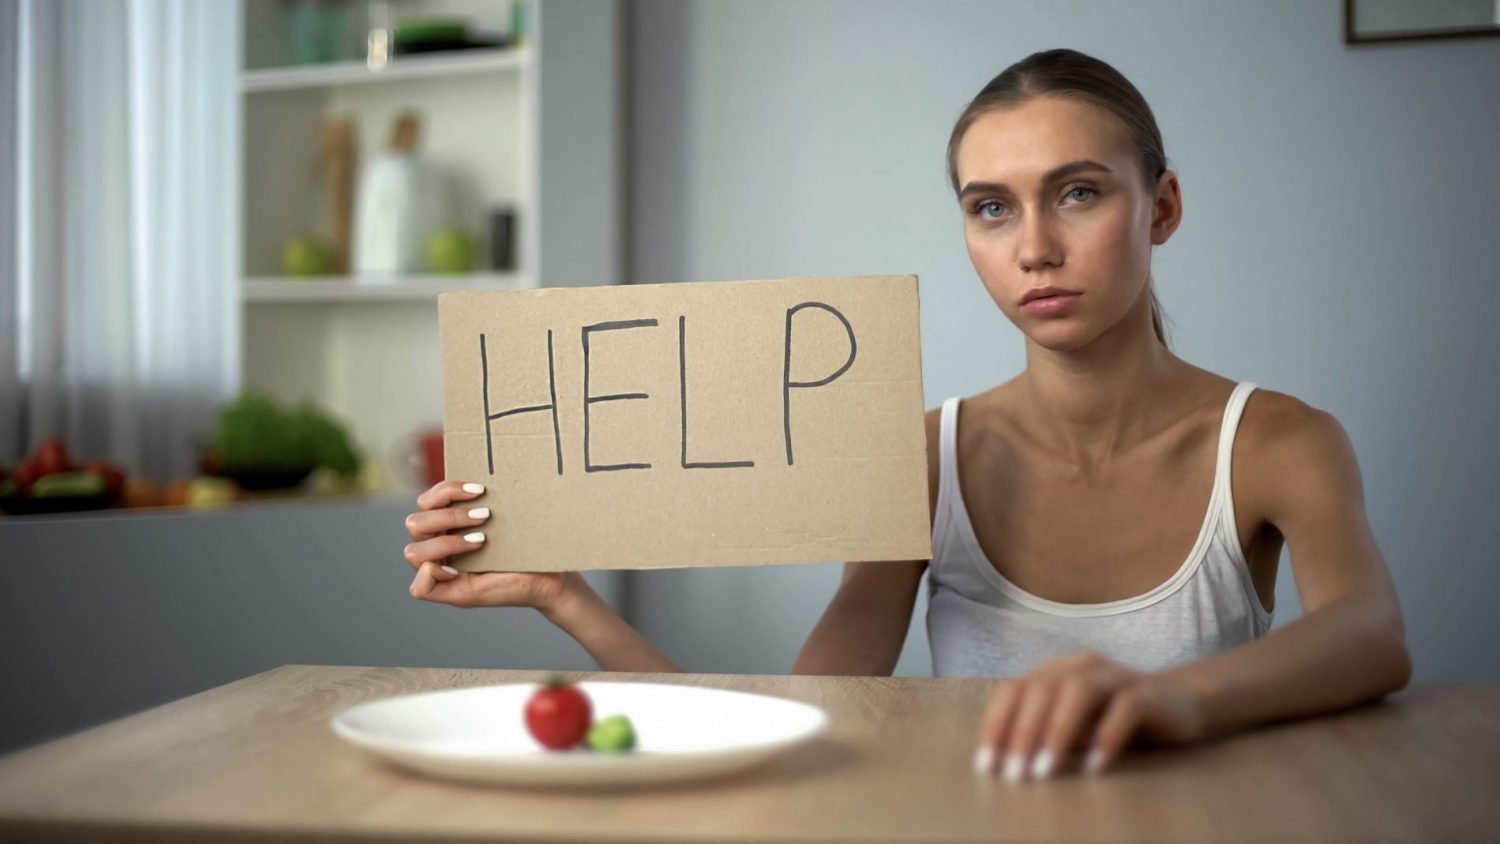 Eating Disorder Treatment in Delray Beach FL